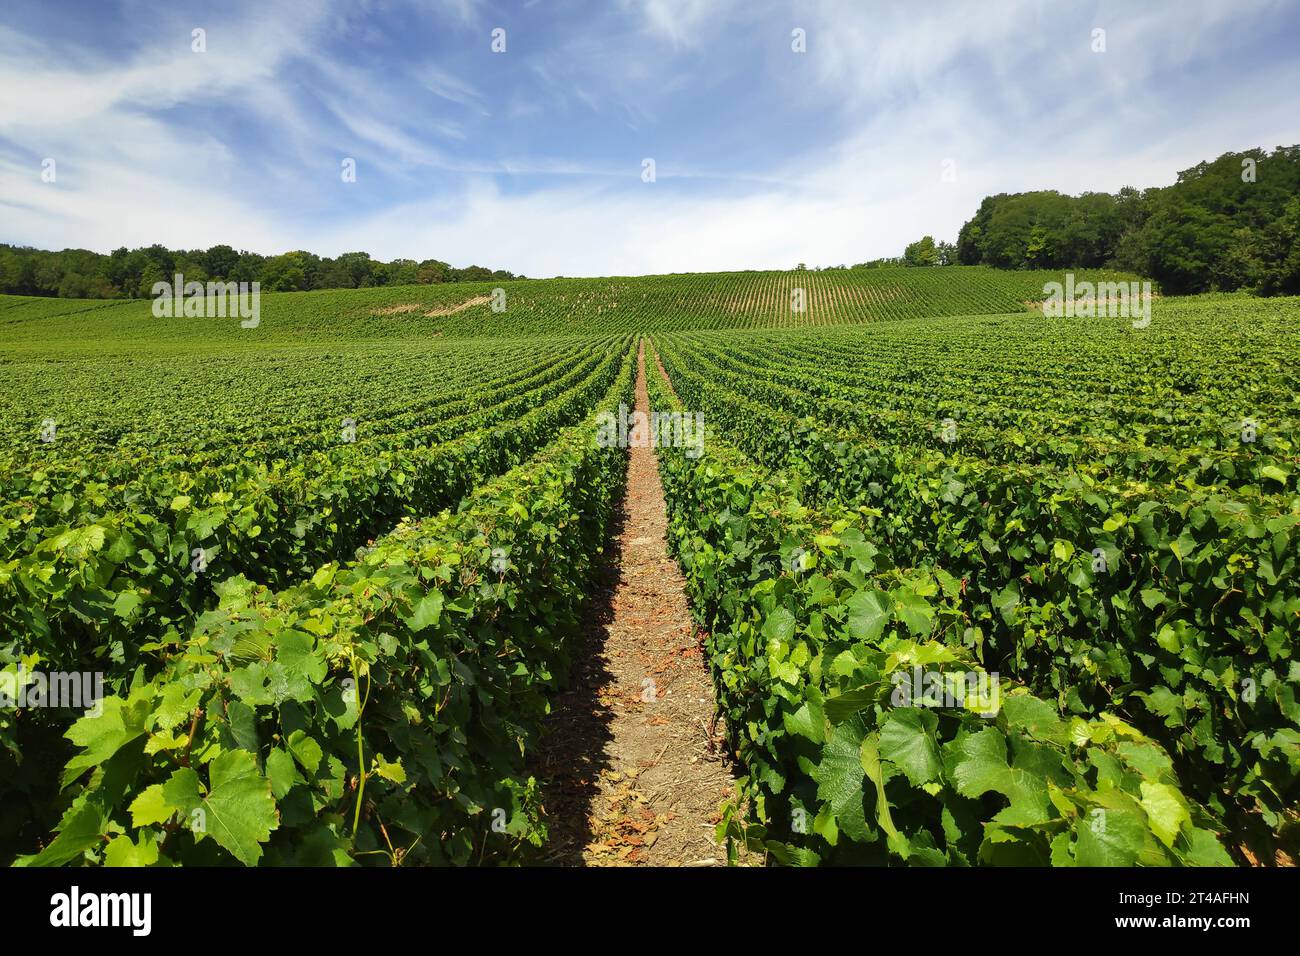 Vineyard in Chateau-Thierry, a town in the Champagne wine region. Stock Photo